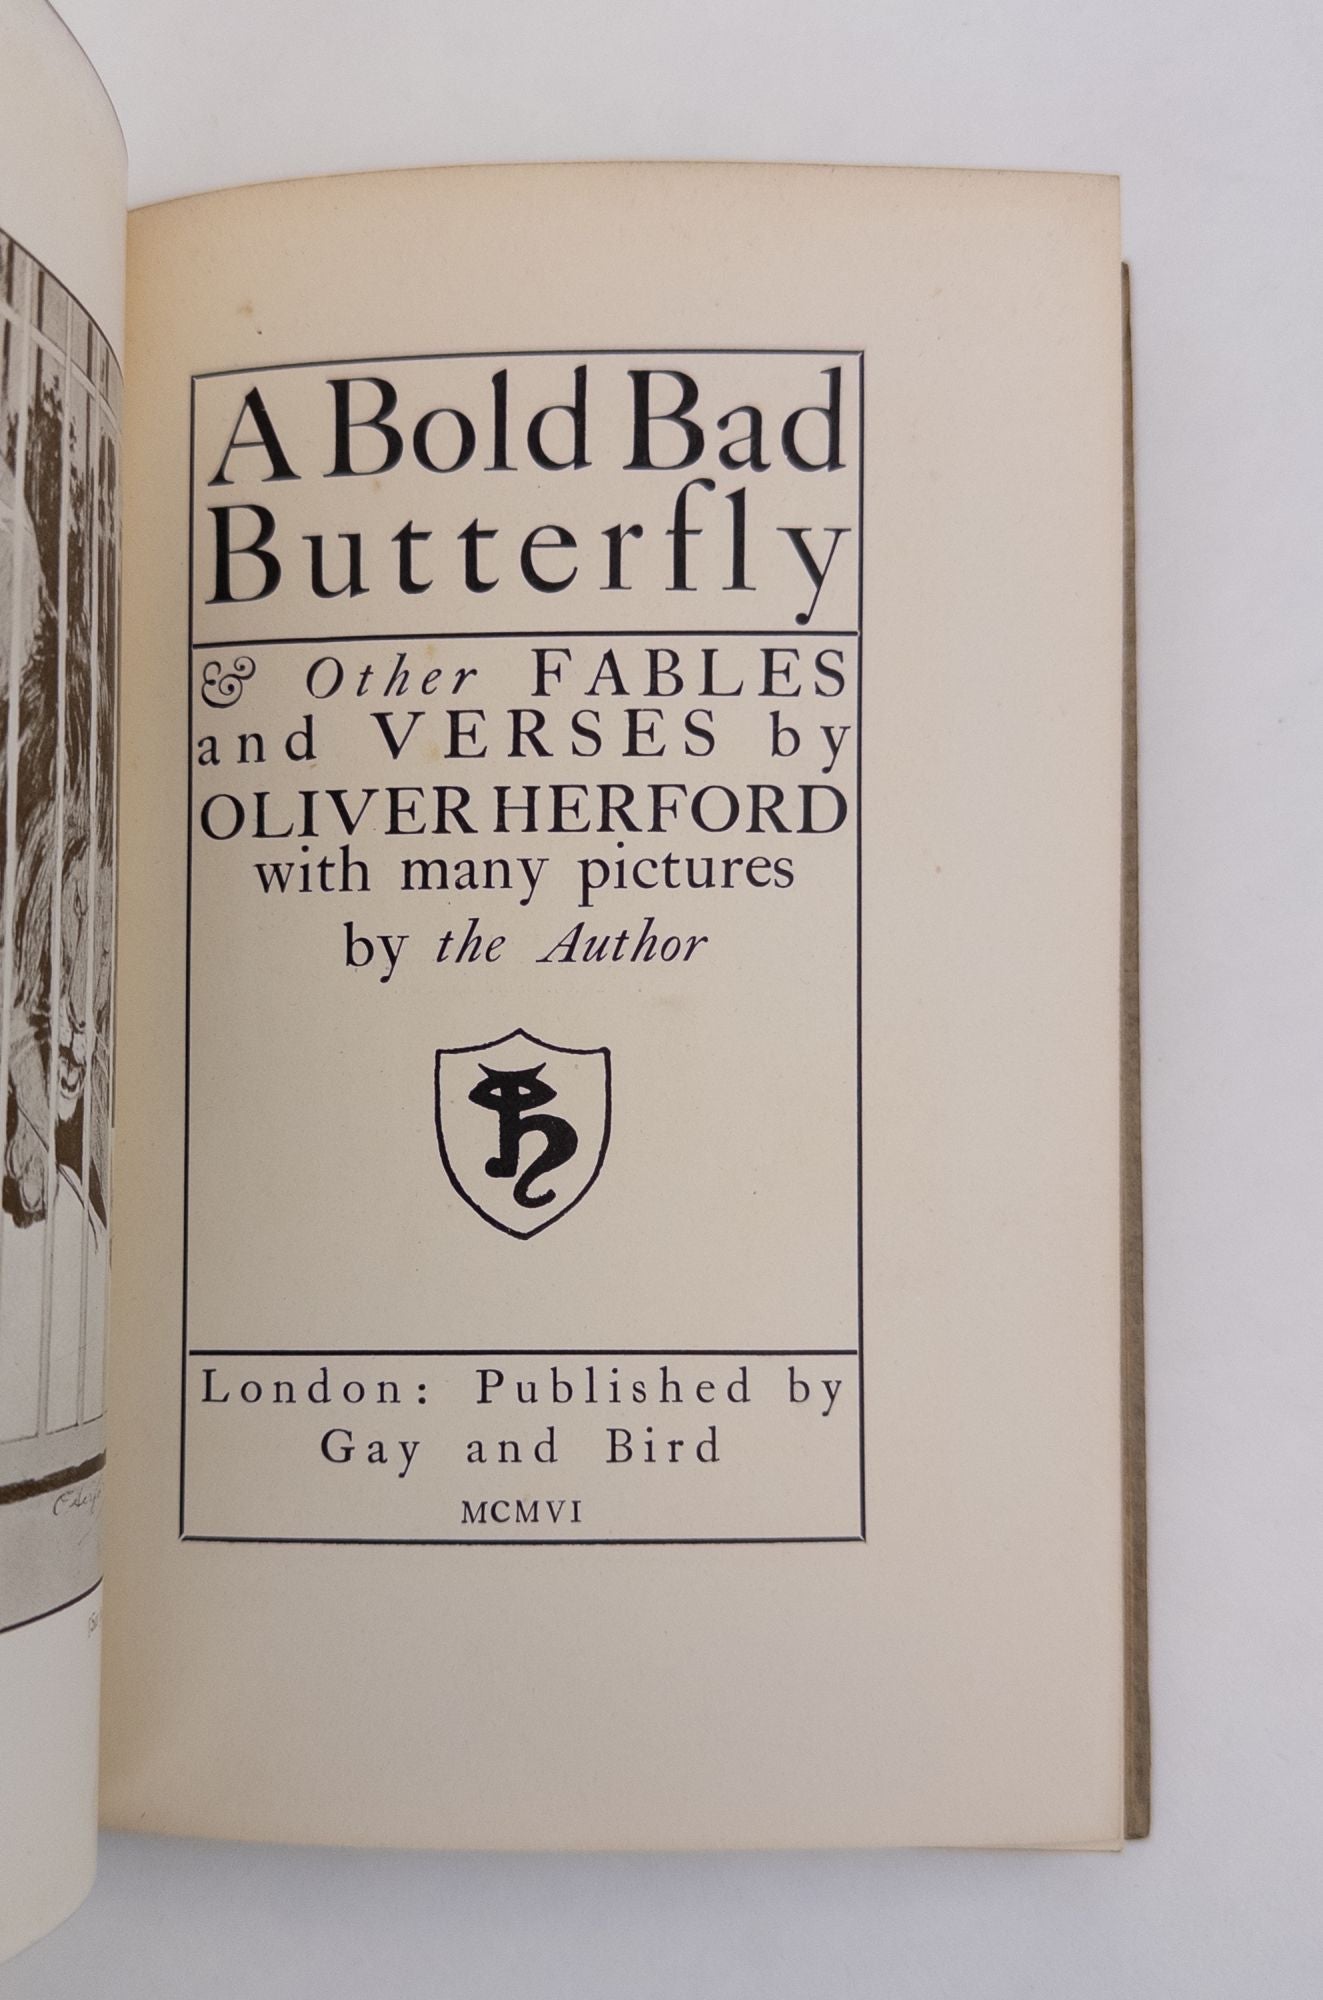 Product Image for A BOLD BAD BUTTERFLY & OTHER FABLES AND VERSES